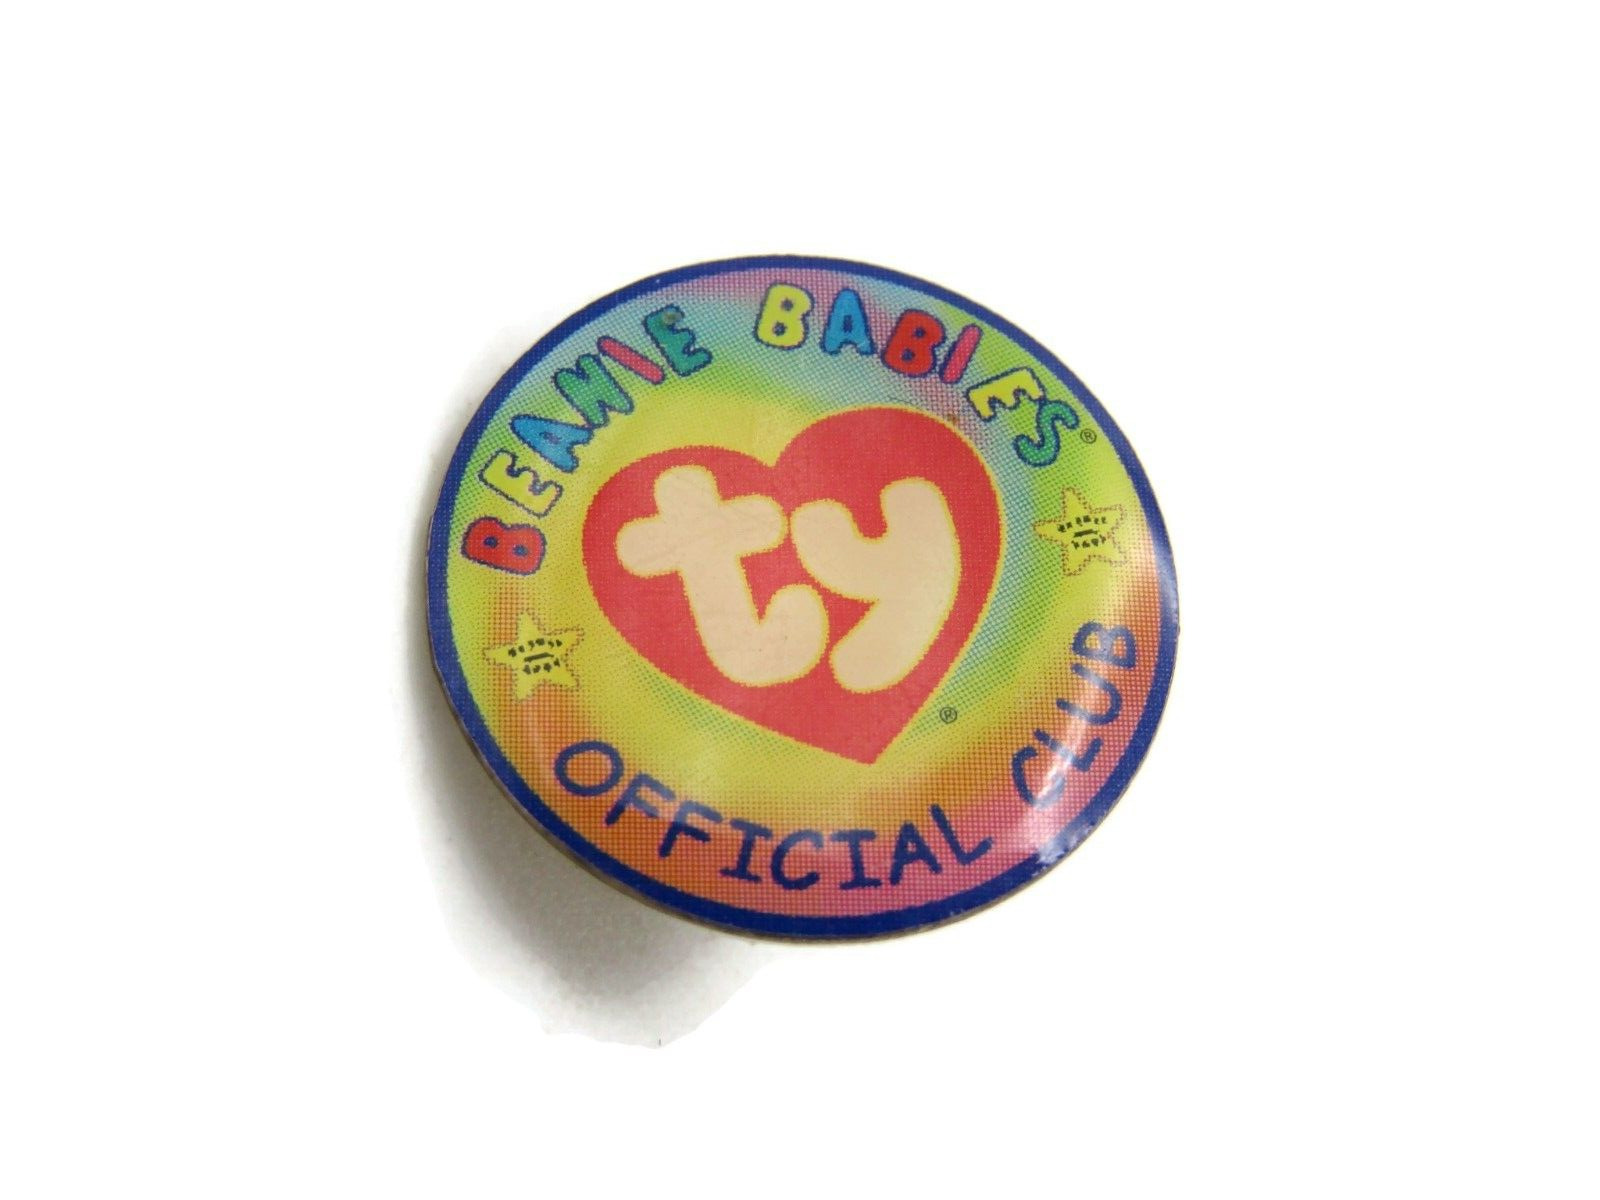 TY Beanie Babies Official Club Pin Gold Tone